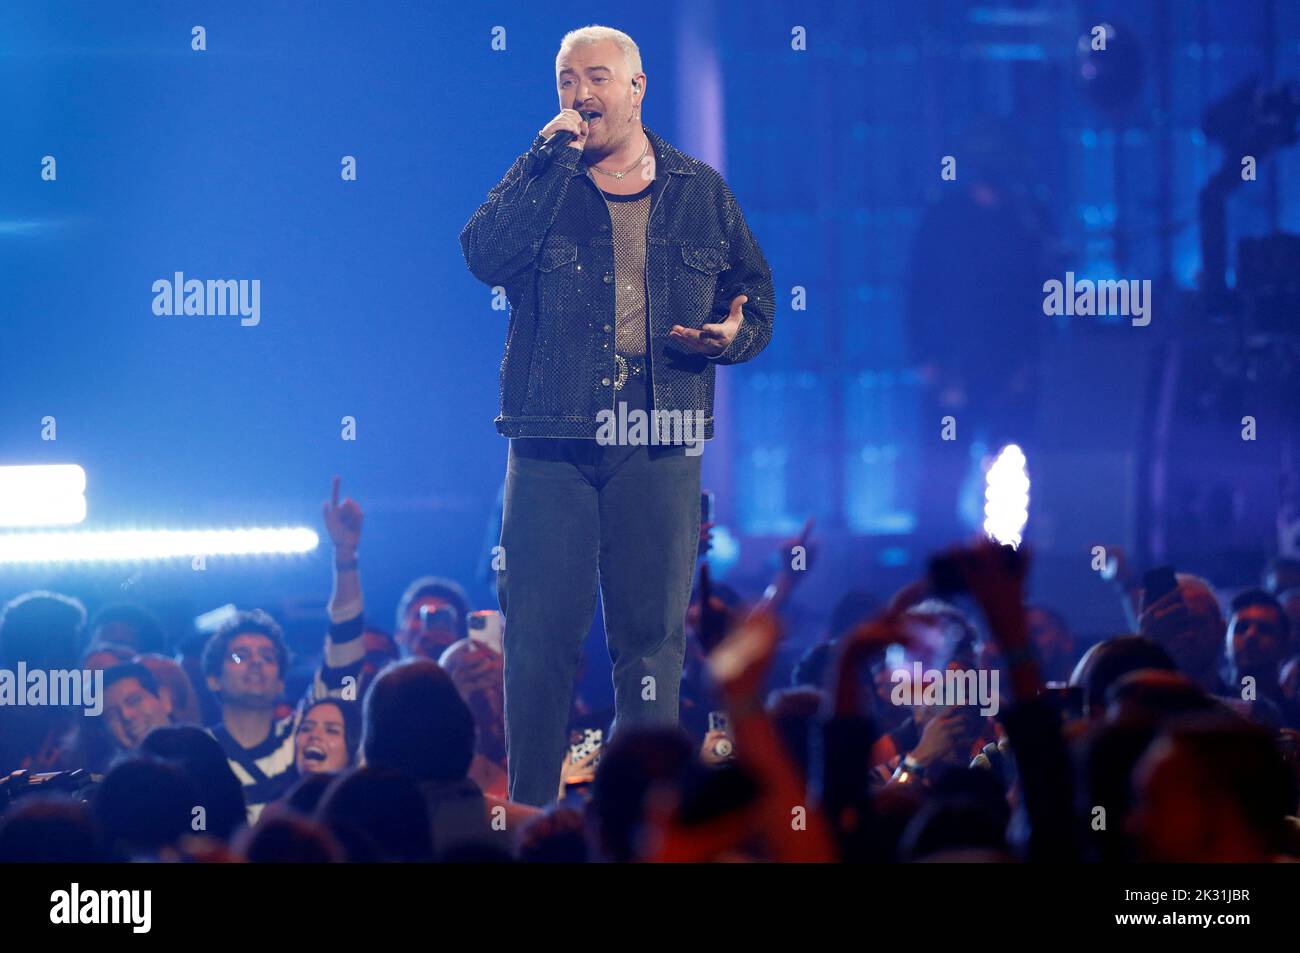 Sam Smith performs during the first day of the iHeartRadio Music Festival 2022 at T-Mobile Arena in Las Vegas, Nevada, U.S. September 23, 2022. REUTERS/Steve Marcus Stock Photo